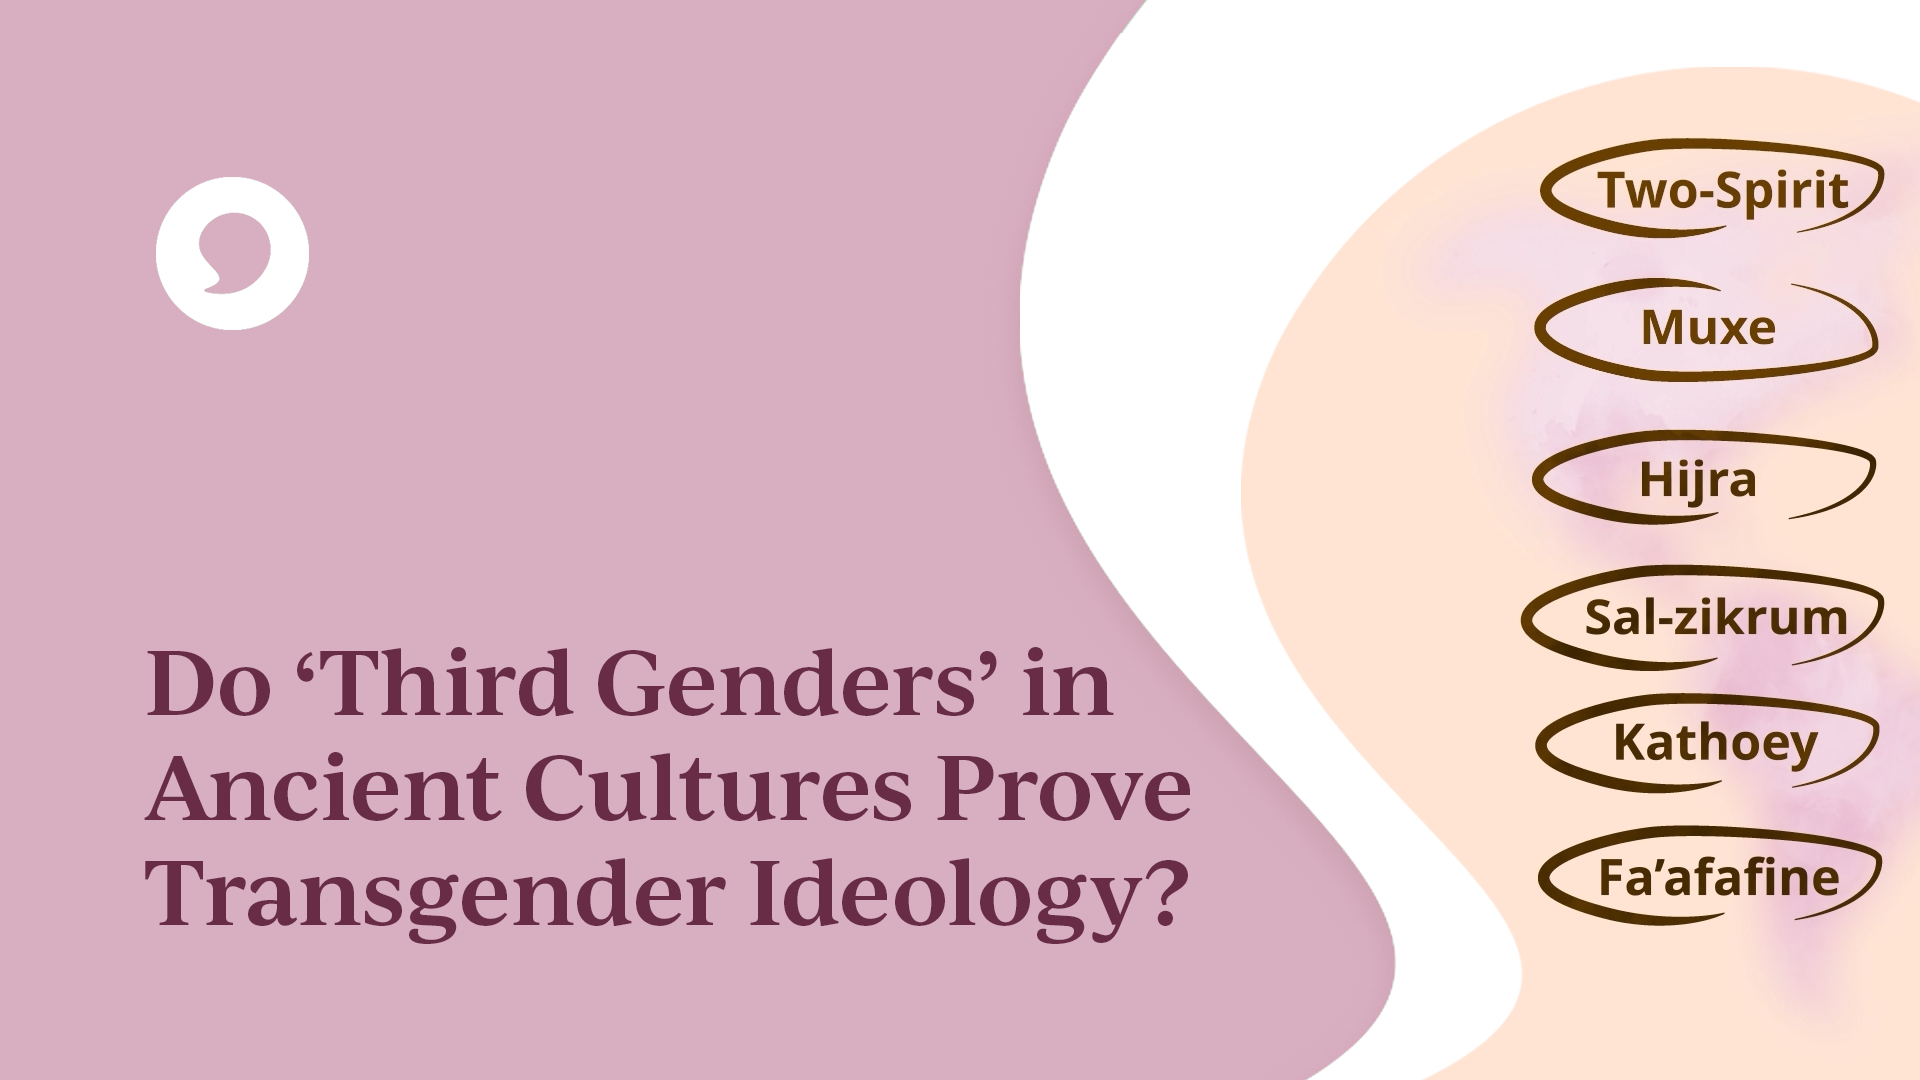 Do ‘Third Genders’ in Ancient Cultures Prove Transgender Ideology?